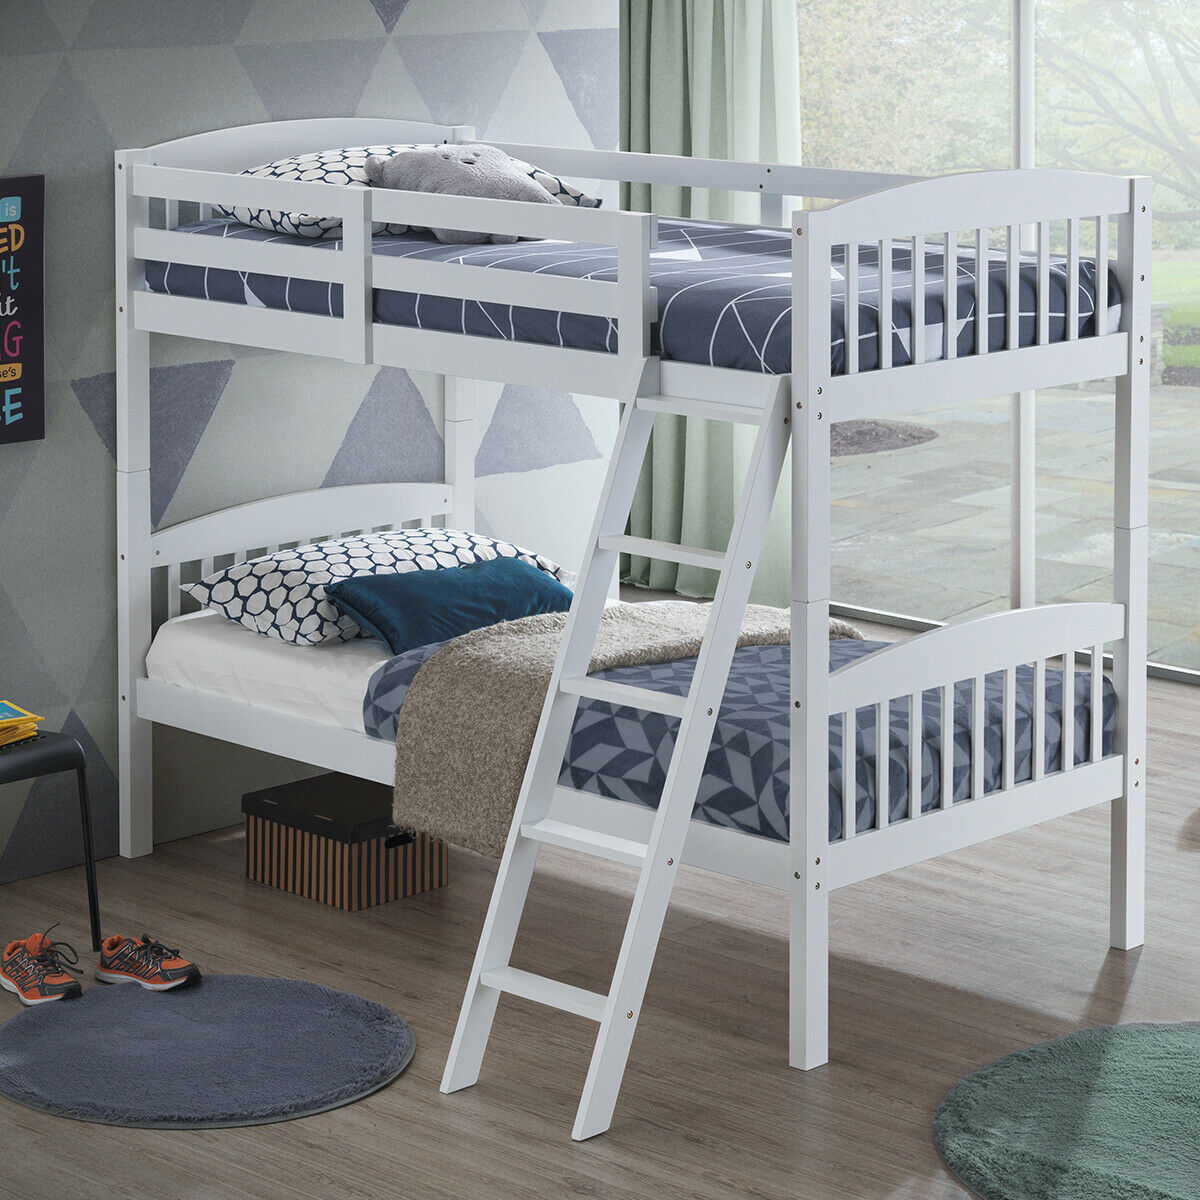 Costway Wood Hardwood Twin Bunk Beds, Bunk Beds Without Ladders